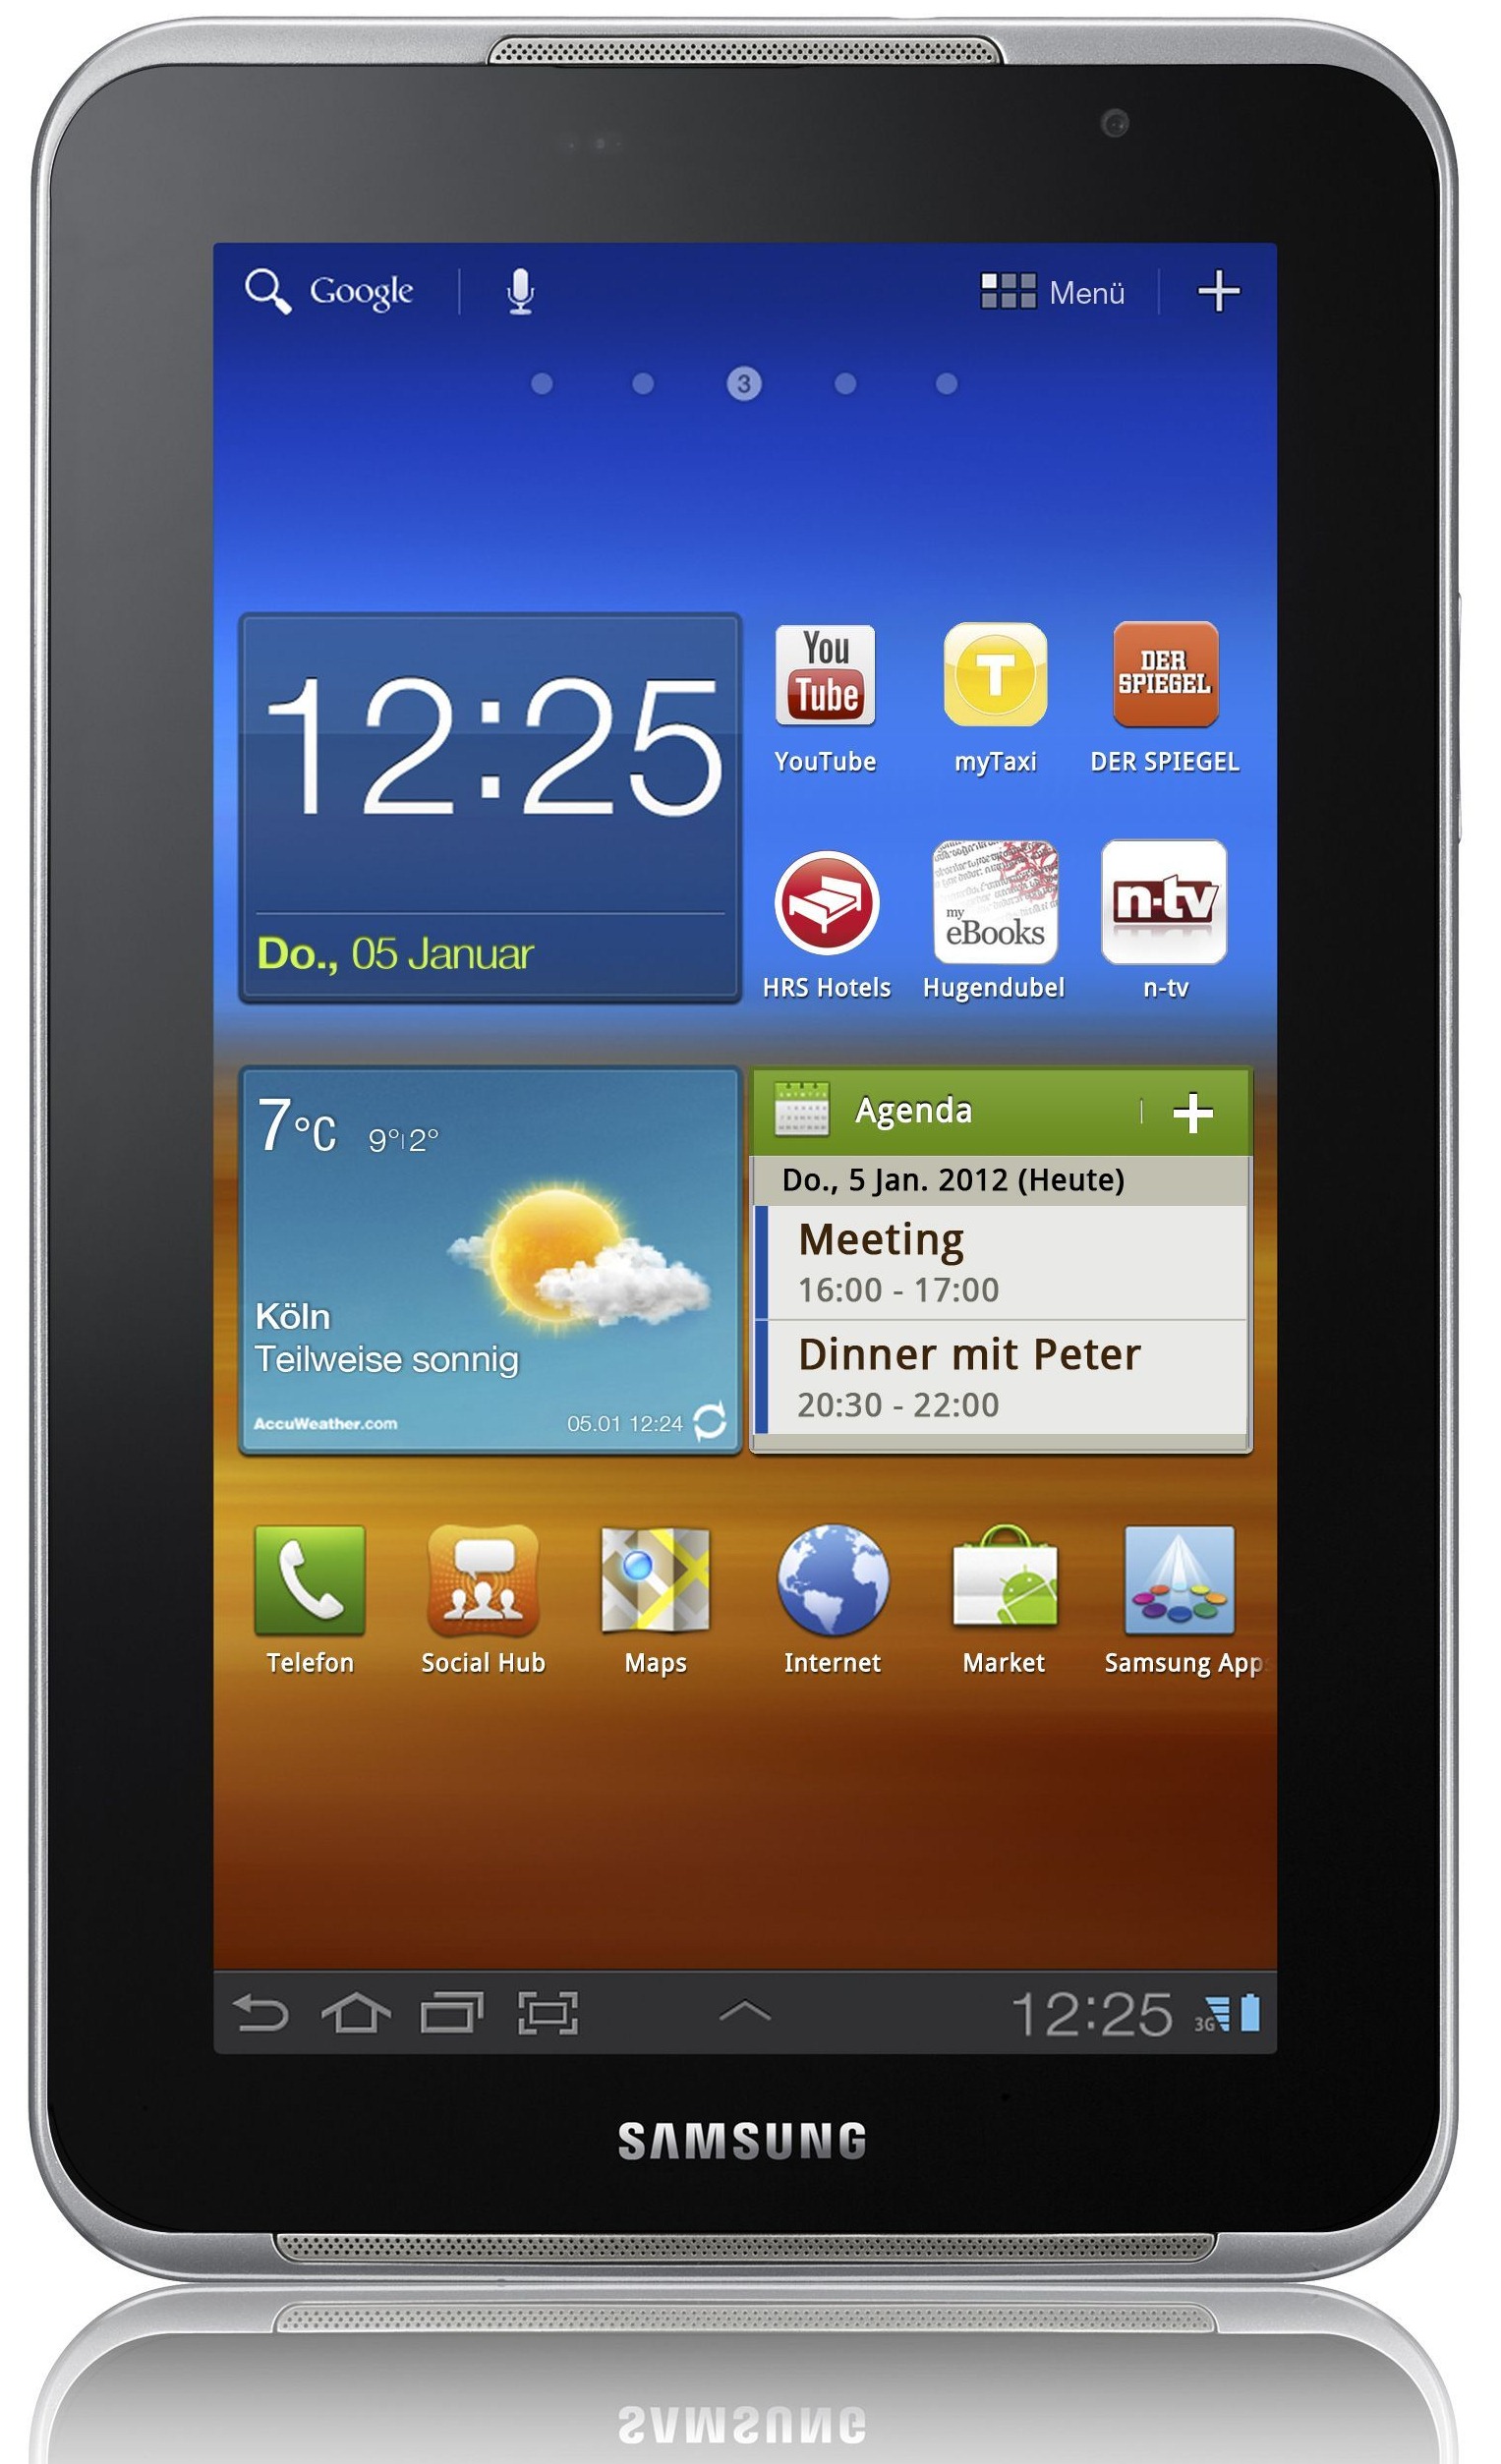 Samsung Galaxy Tab 7.0 Plus N Full Specifications And Price Details